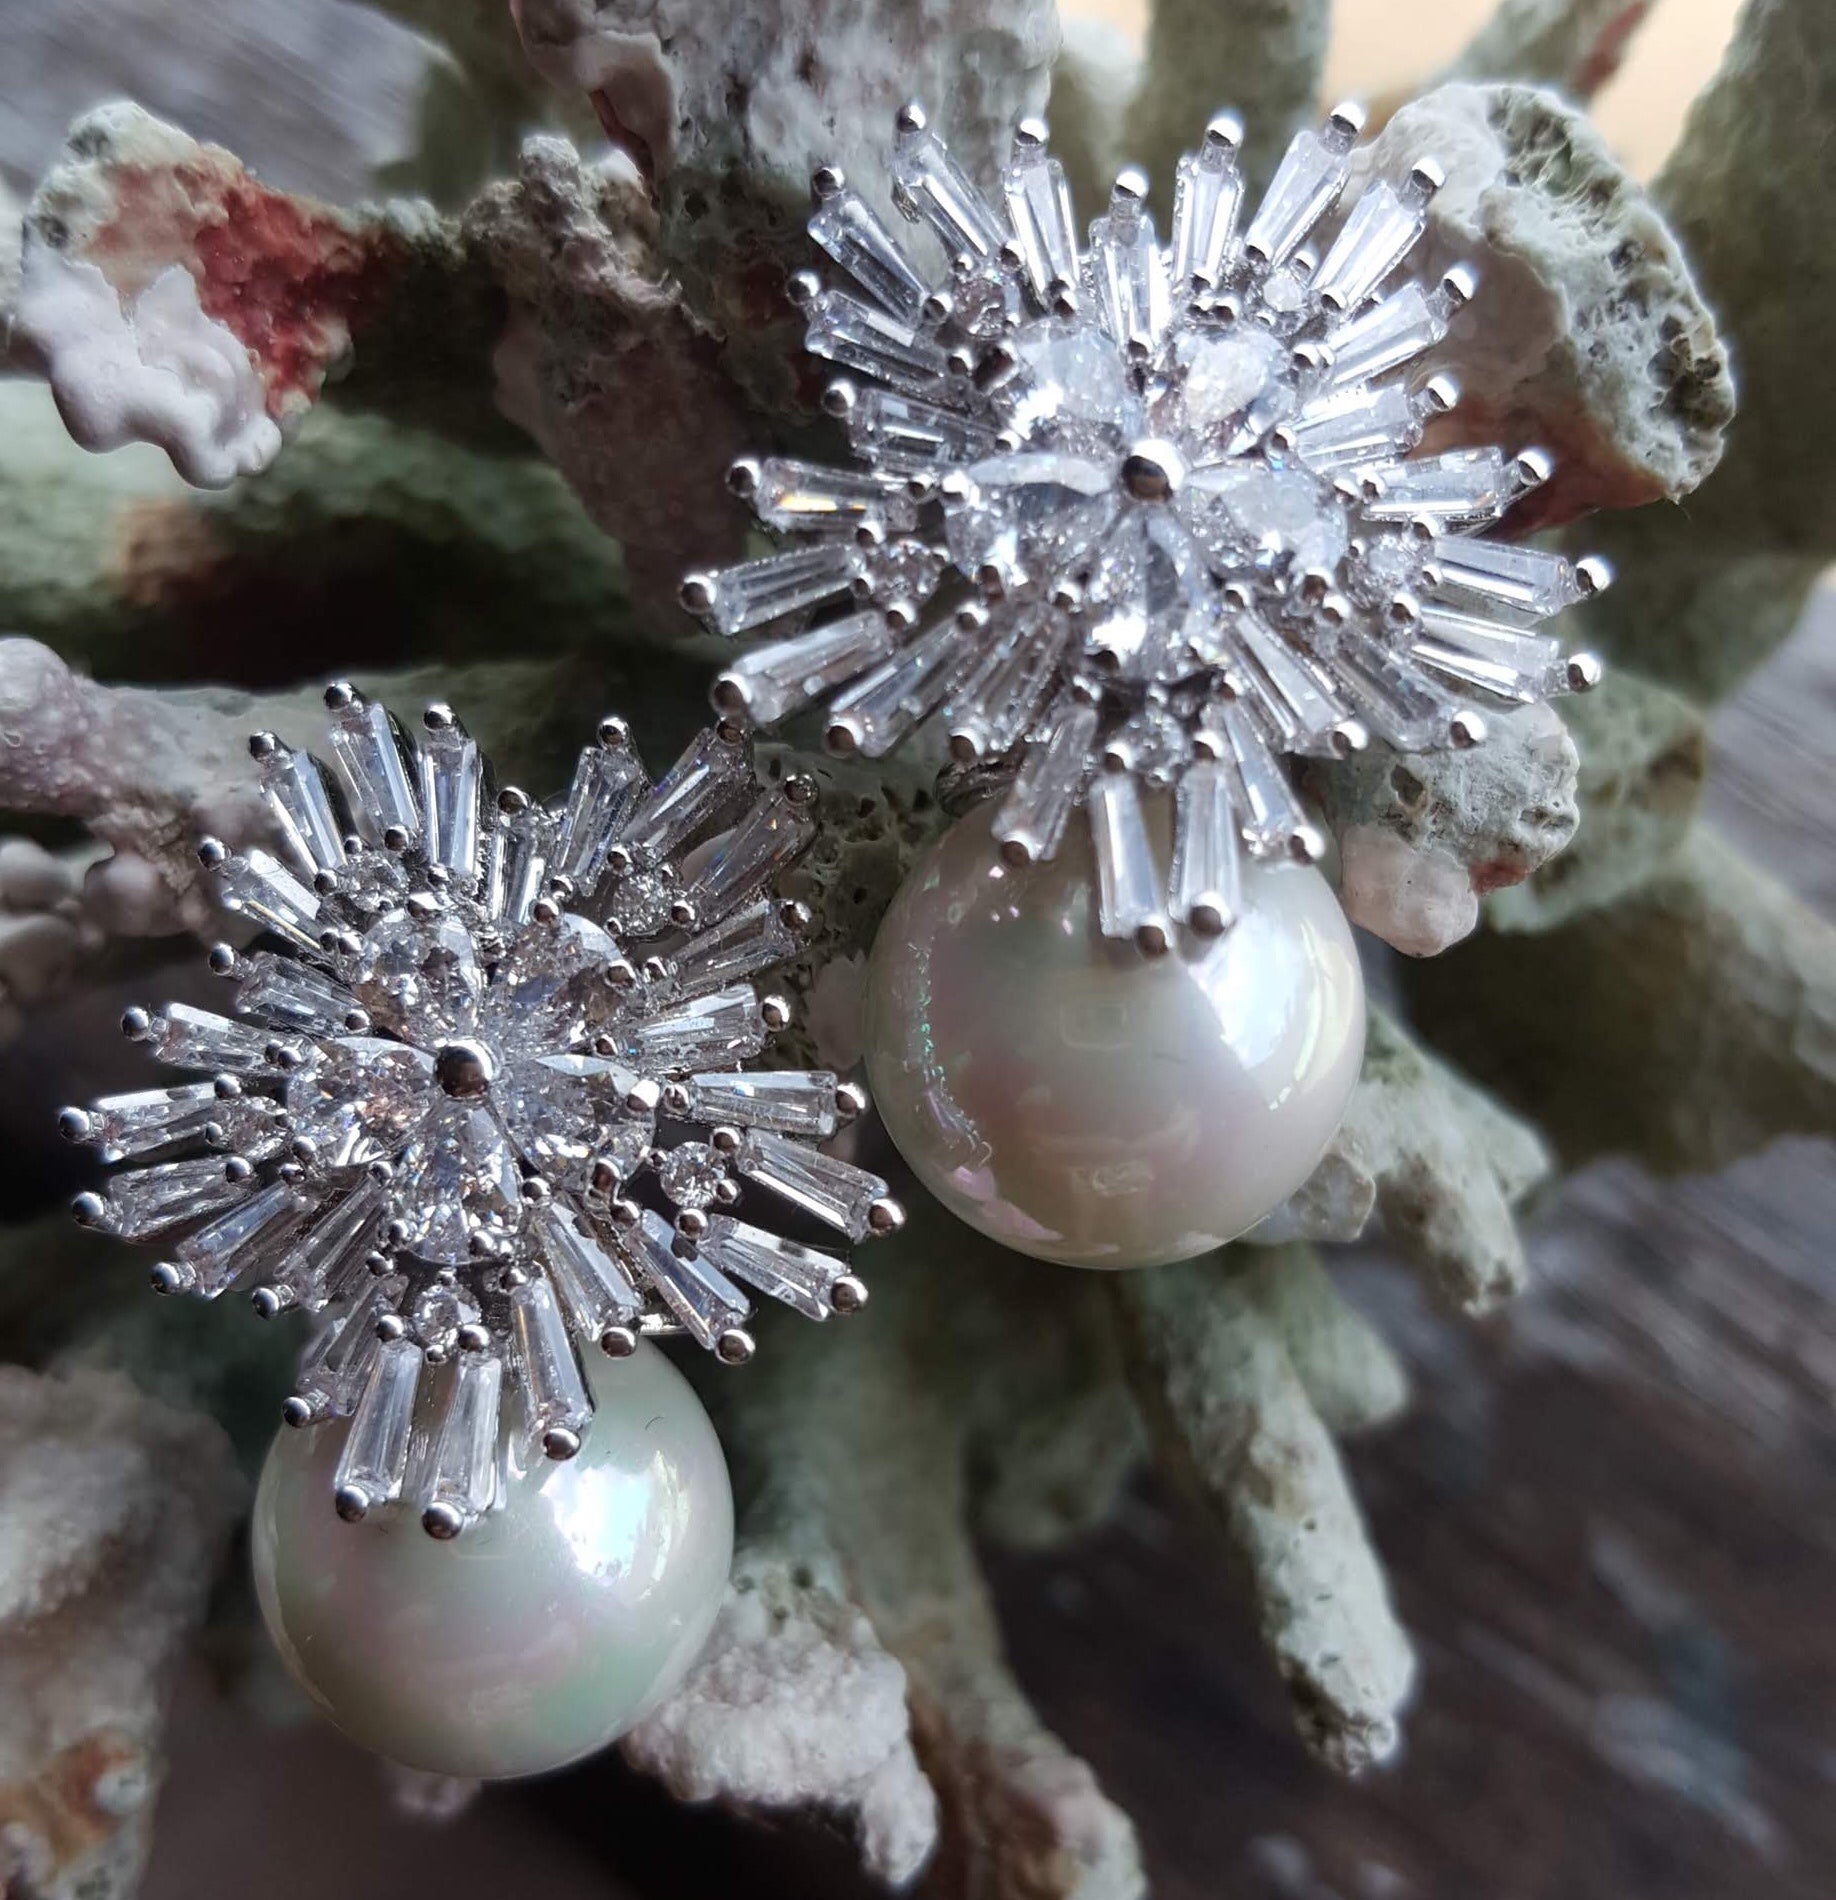 Crystal flower and close placed pearl earrings